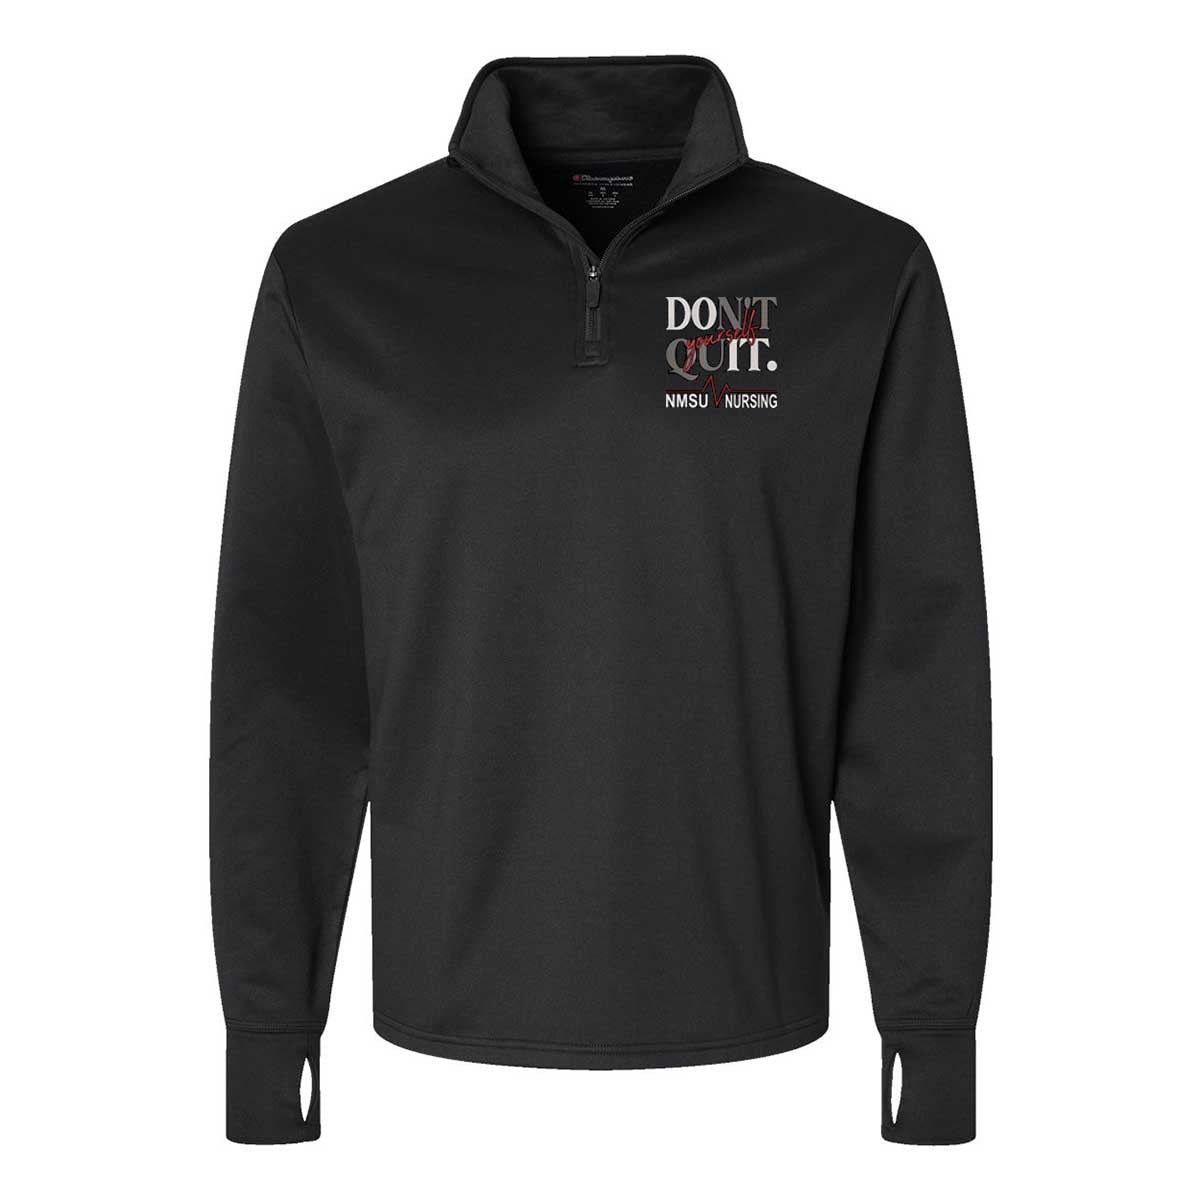 Unisex NMSU SNA Student Nurses Association Sport Quarter-Zip Pullover with Thumbhole Cuffs and Embroidered Logo Cuffs